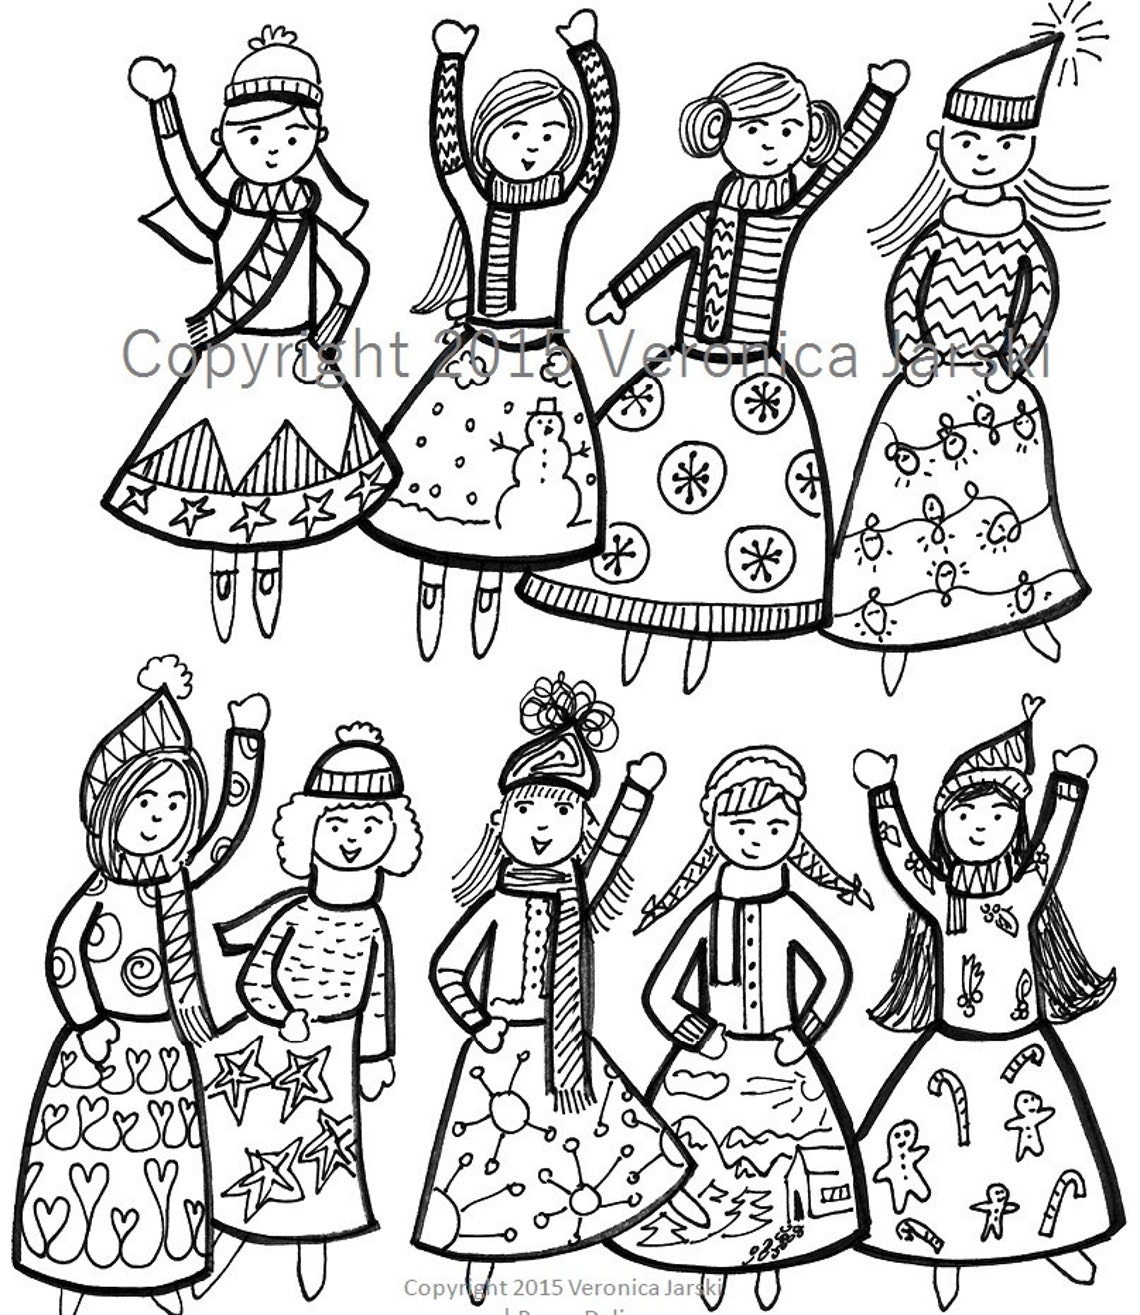 free-12-days-of-christmas-coloring-pages